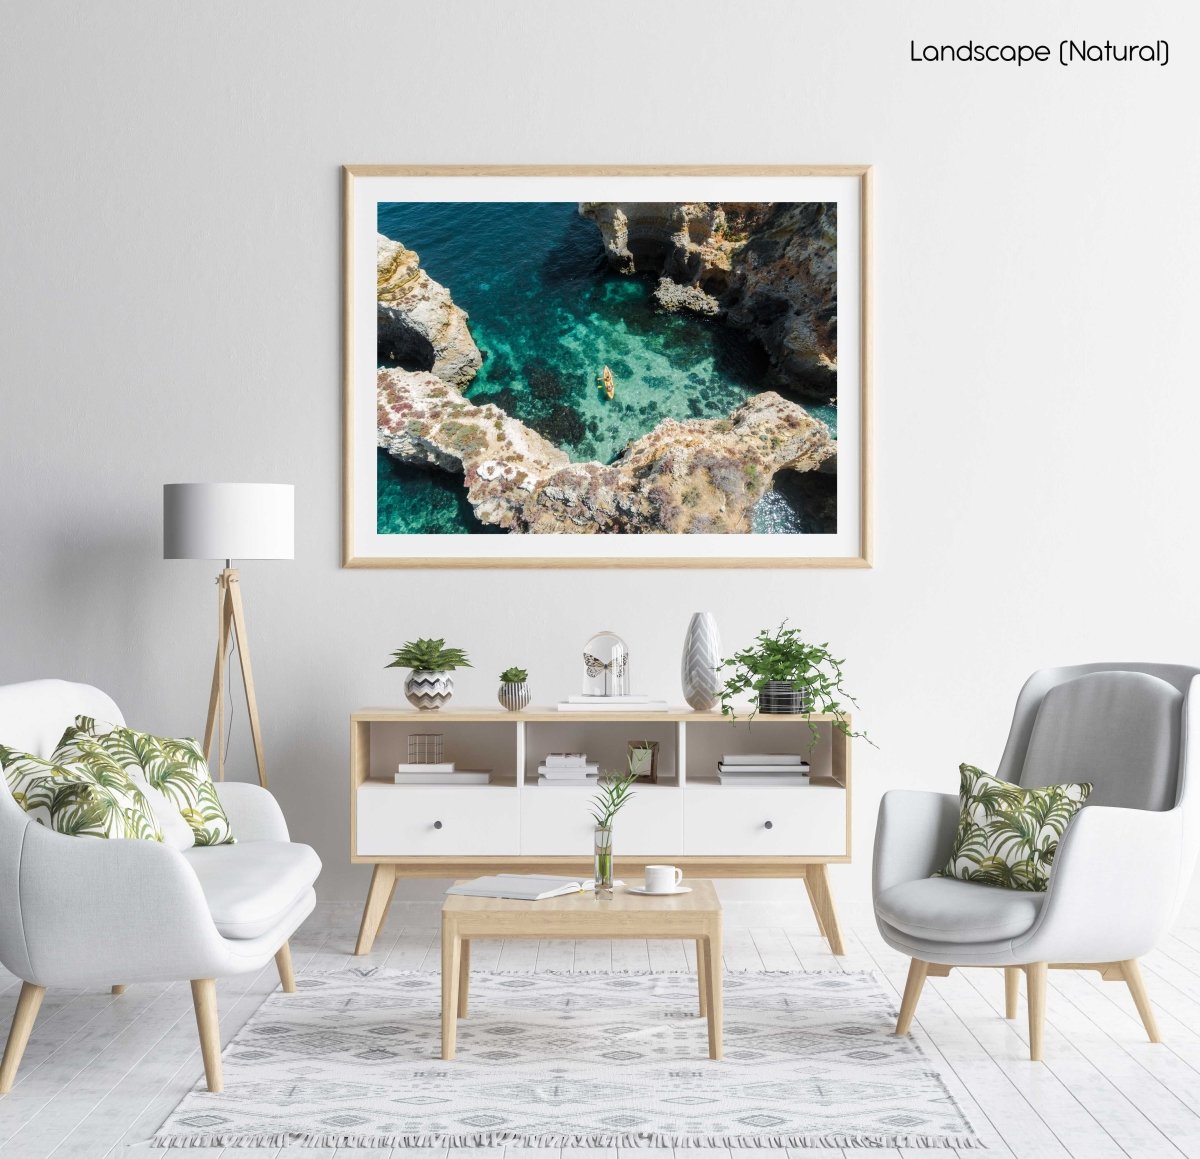 Aerial of two people paddling yellow kayak near Lagos caves in ocean in a natural fine art frame